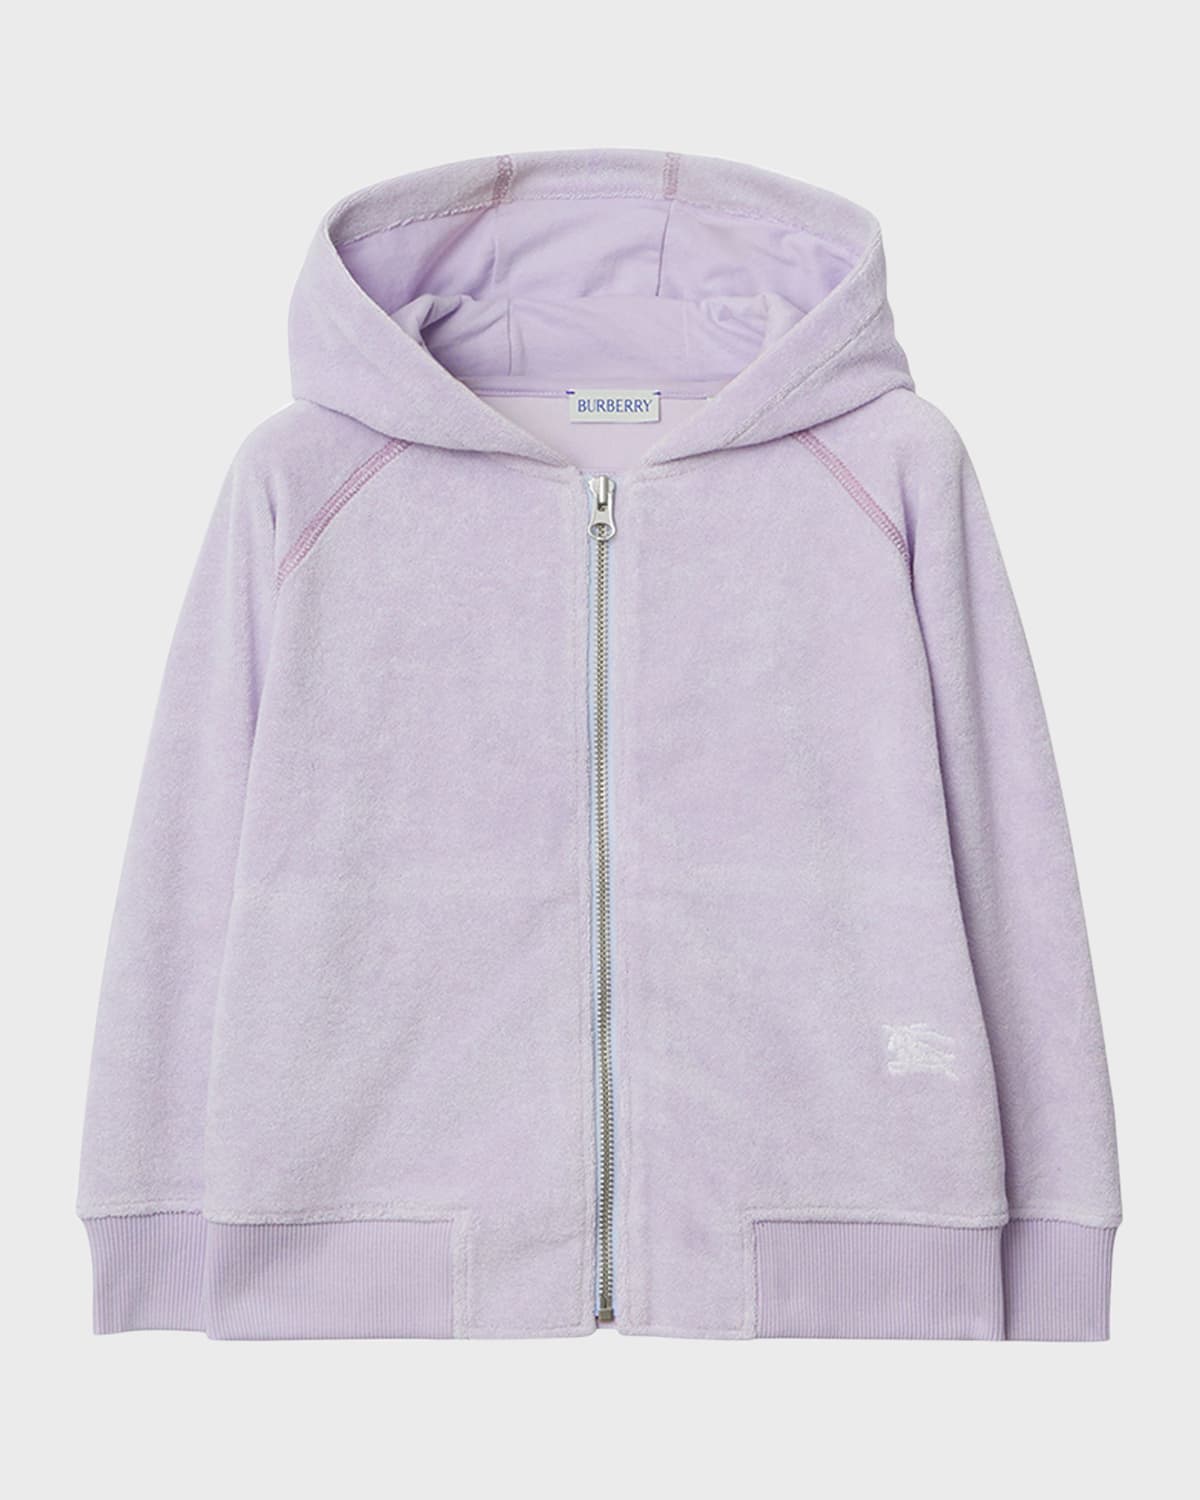 Burberry Kids' Little Girl's & Girl's Toweling Zip-up Hoodie In Muted Lilac